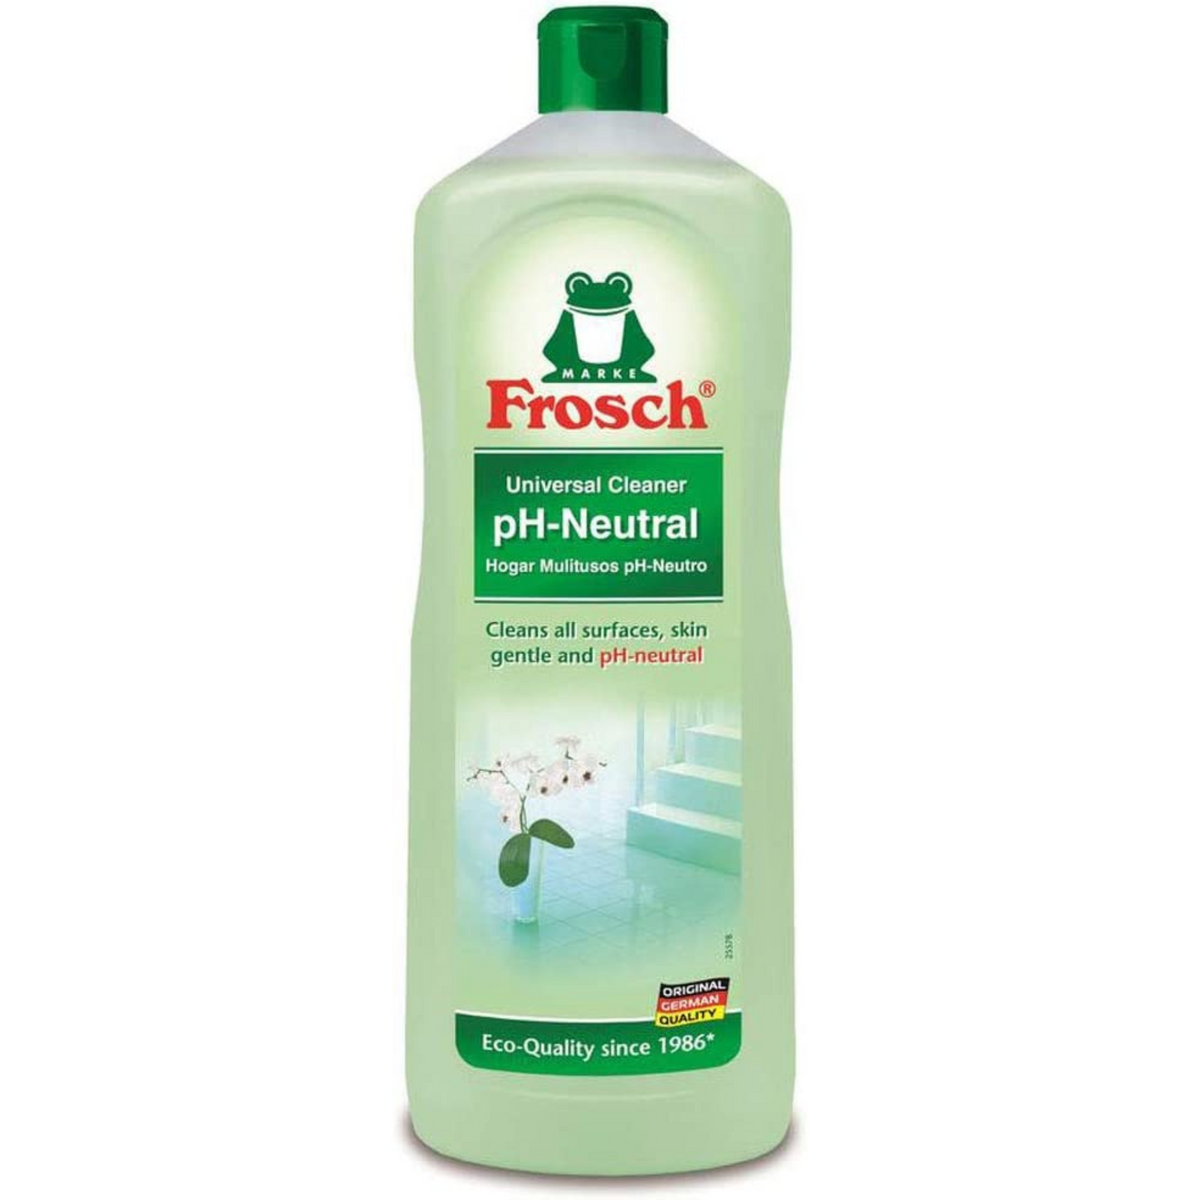 Primary Image of Frosch PH-Neutral Universal Cleaner (1000 ml) 